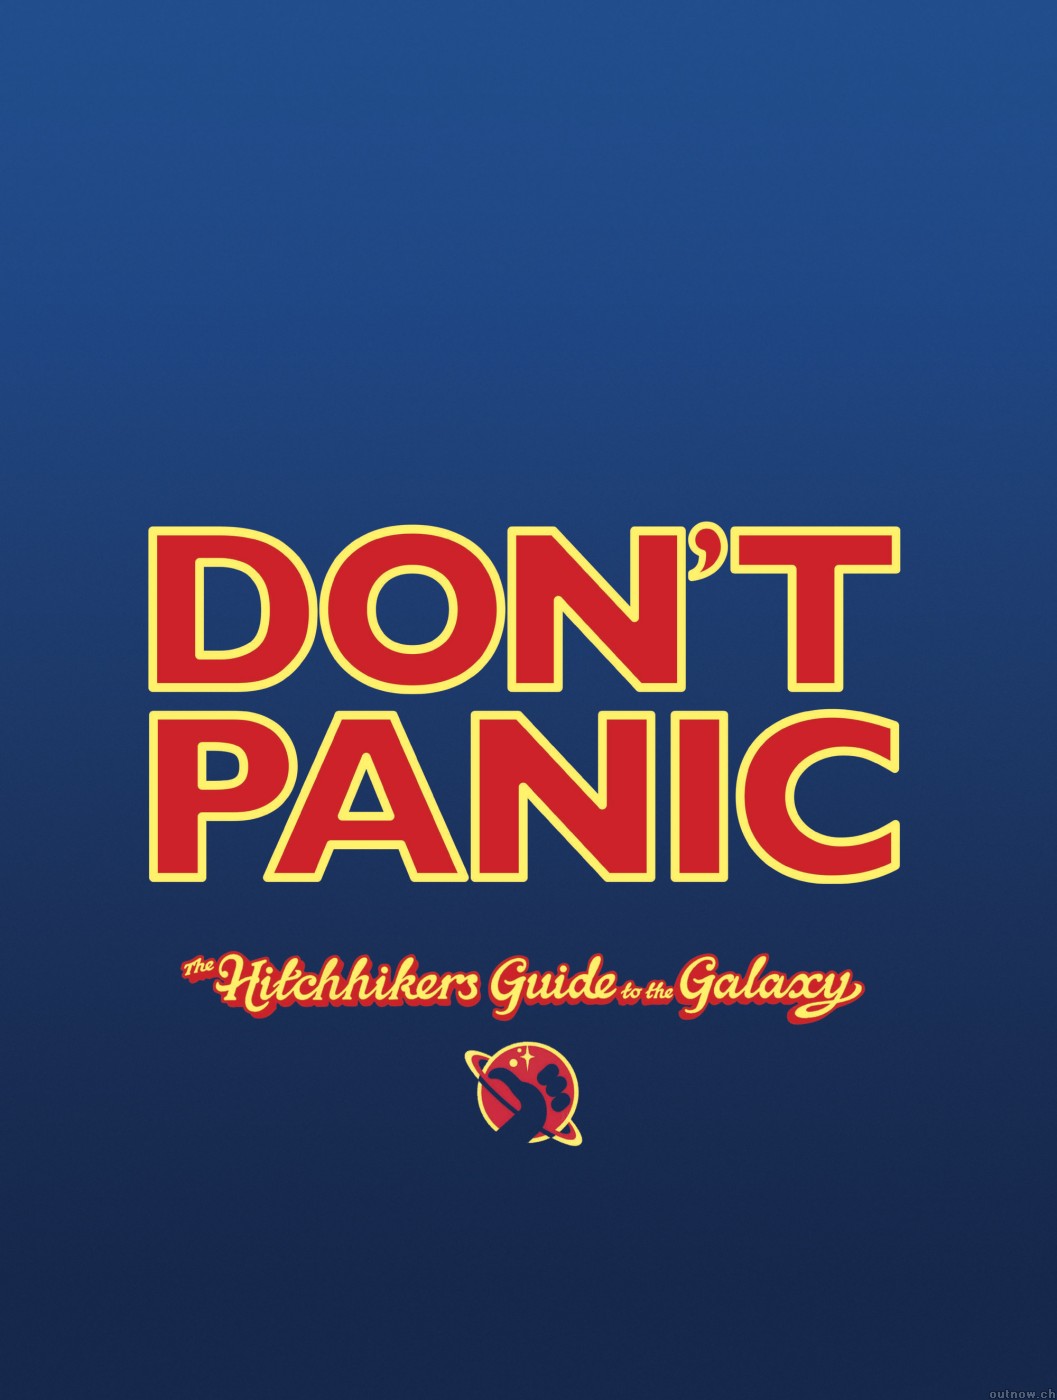 hitchhikers_guide_to_galaxy.2005.teaser.jpg (127018 Byte)